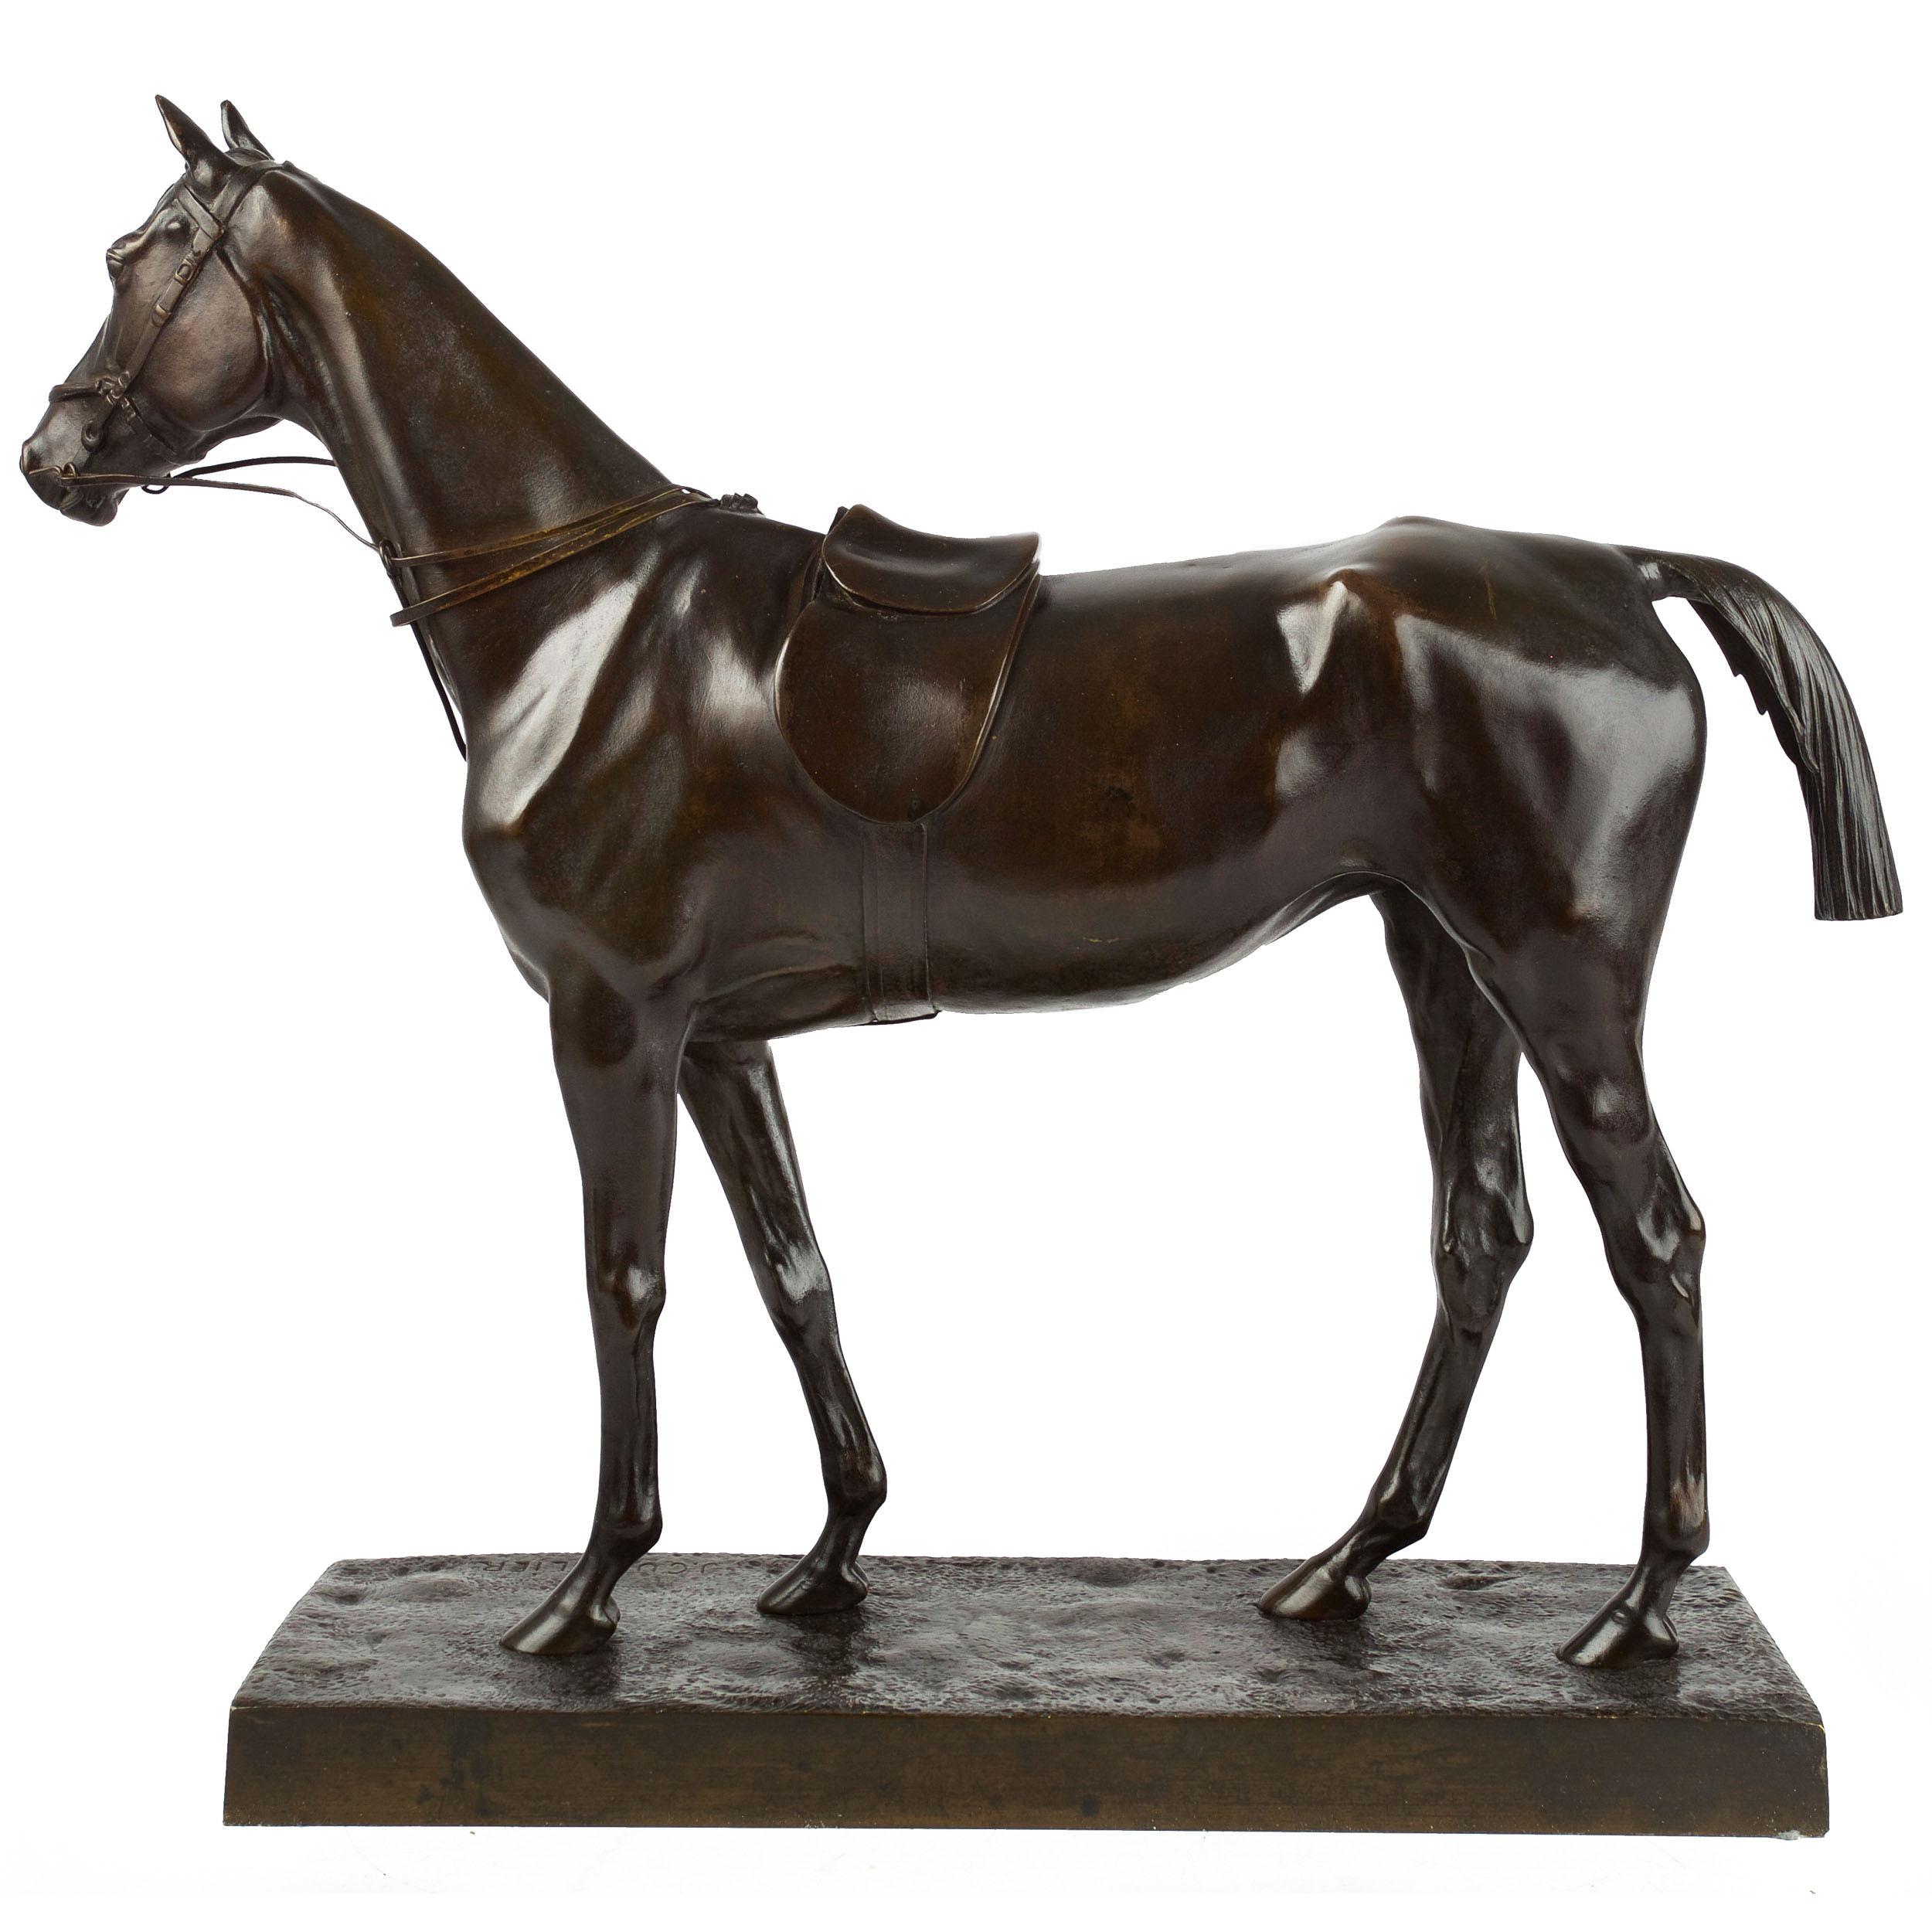 A superb model of a saddled racehorse circa 1860 by Joseph Cuvelier, it was cast by the H. Luppens & Cie foundry with great skill, the surface showing superior technical skill with very gentle texture cast over from the mold along the body and